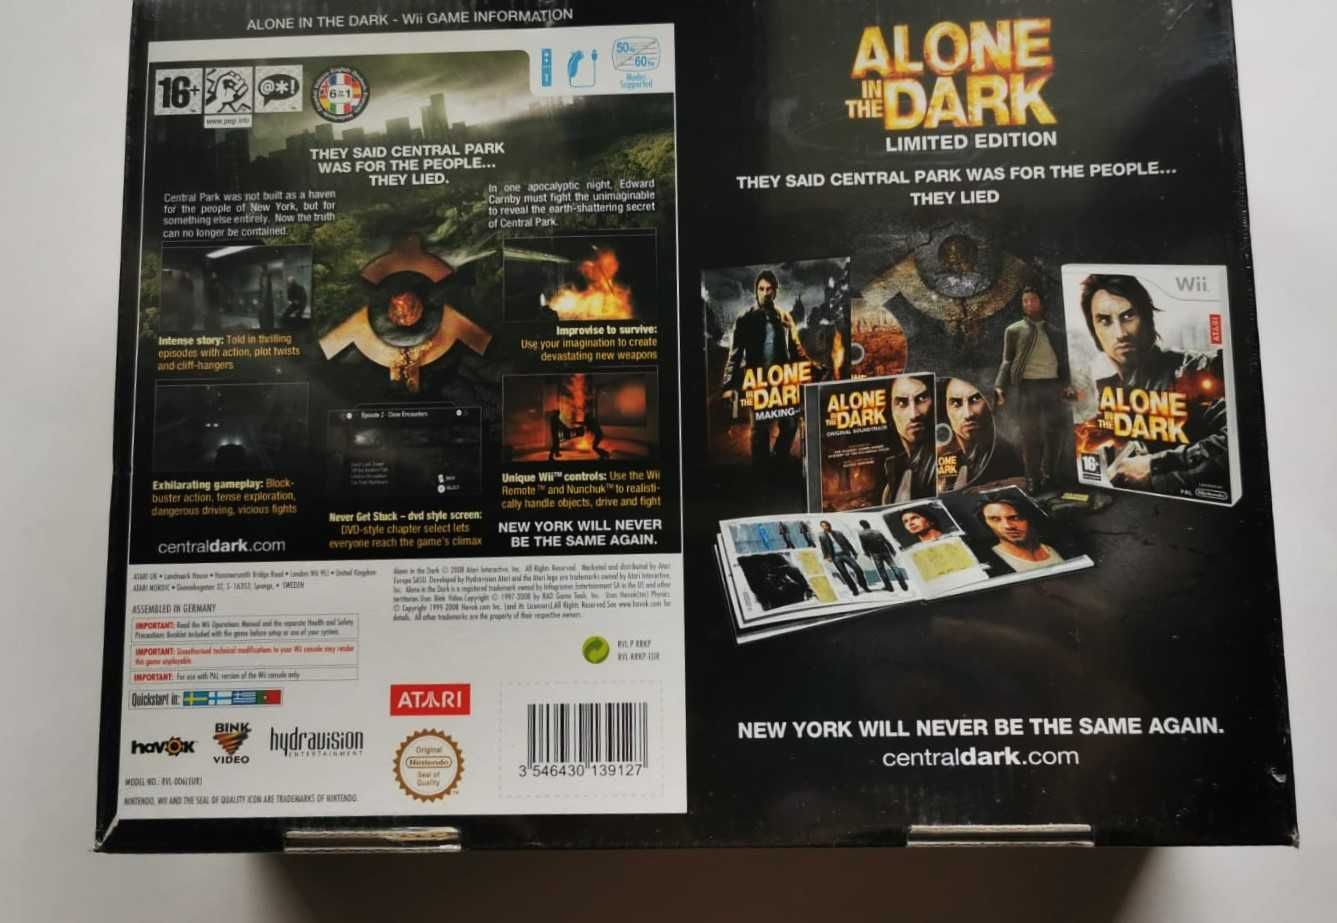 Alone in the Dark Wii - Limited Edition